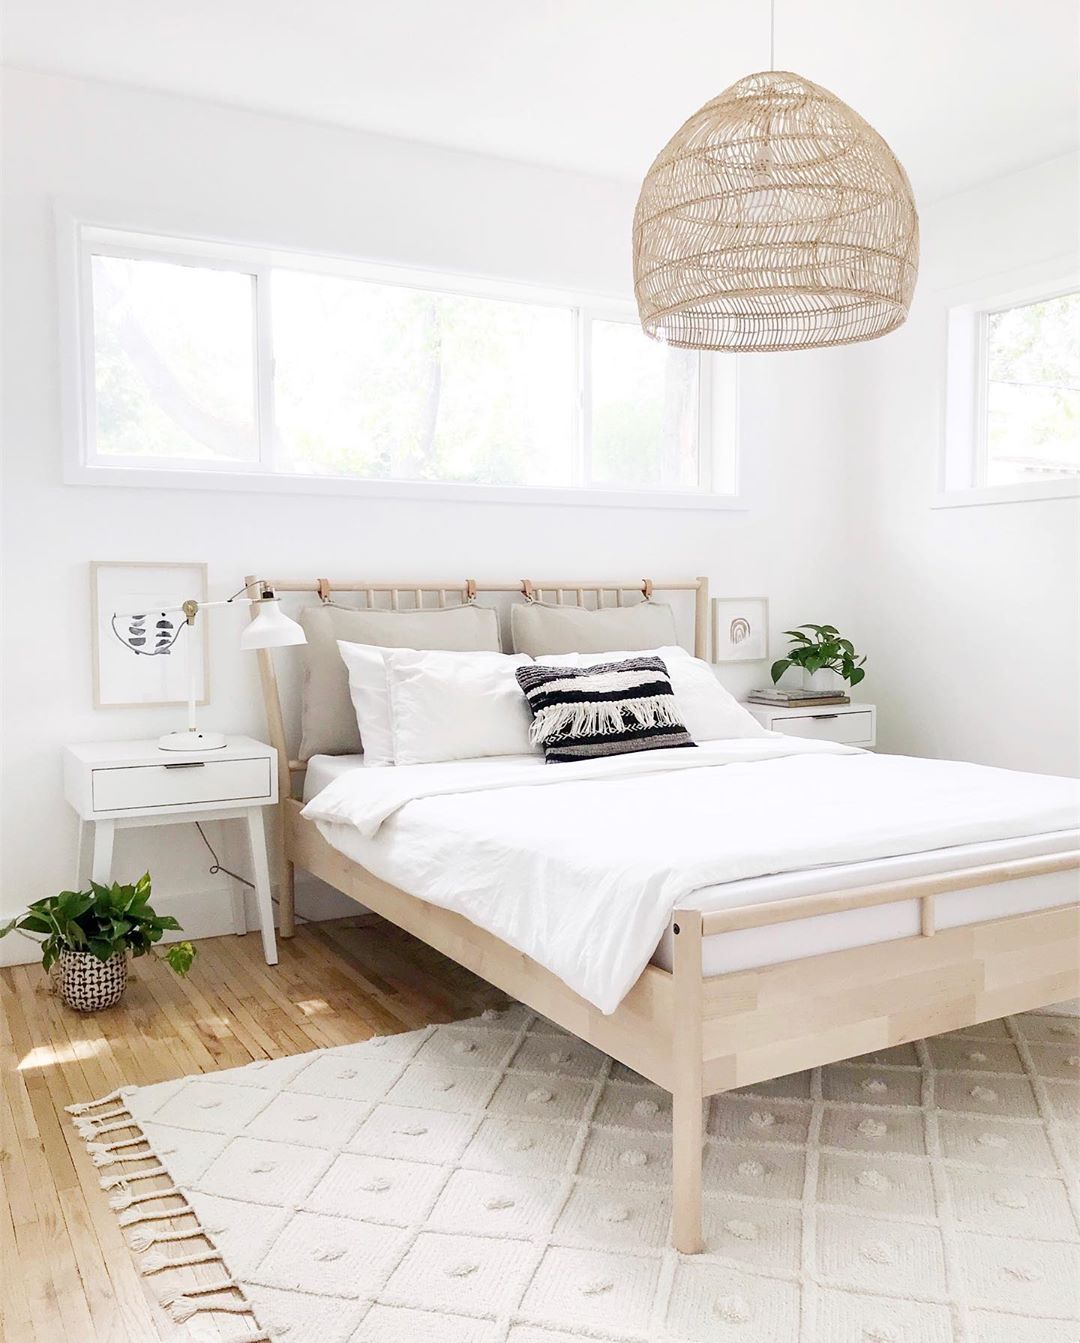 White bedroom with light brown bed and light fixture. Photo by Instagram user @farahpro